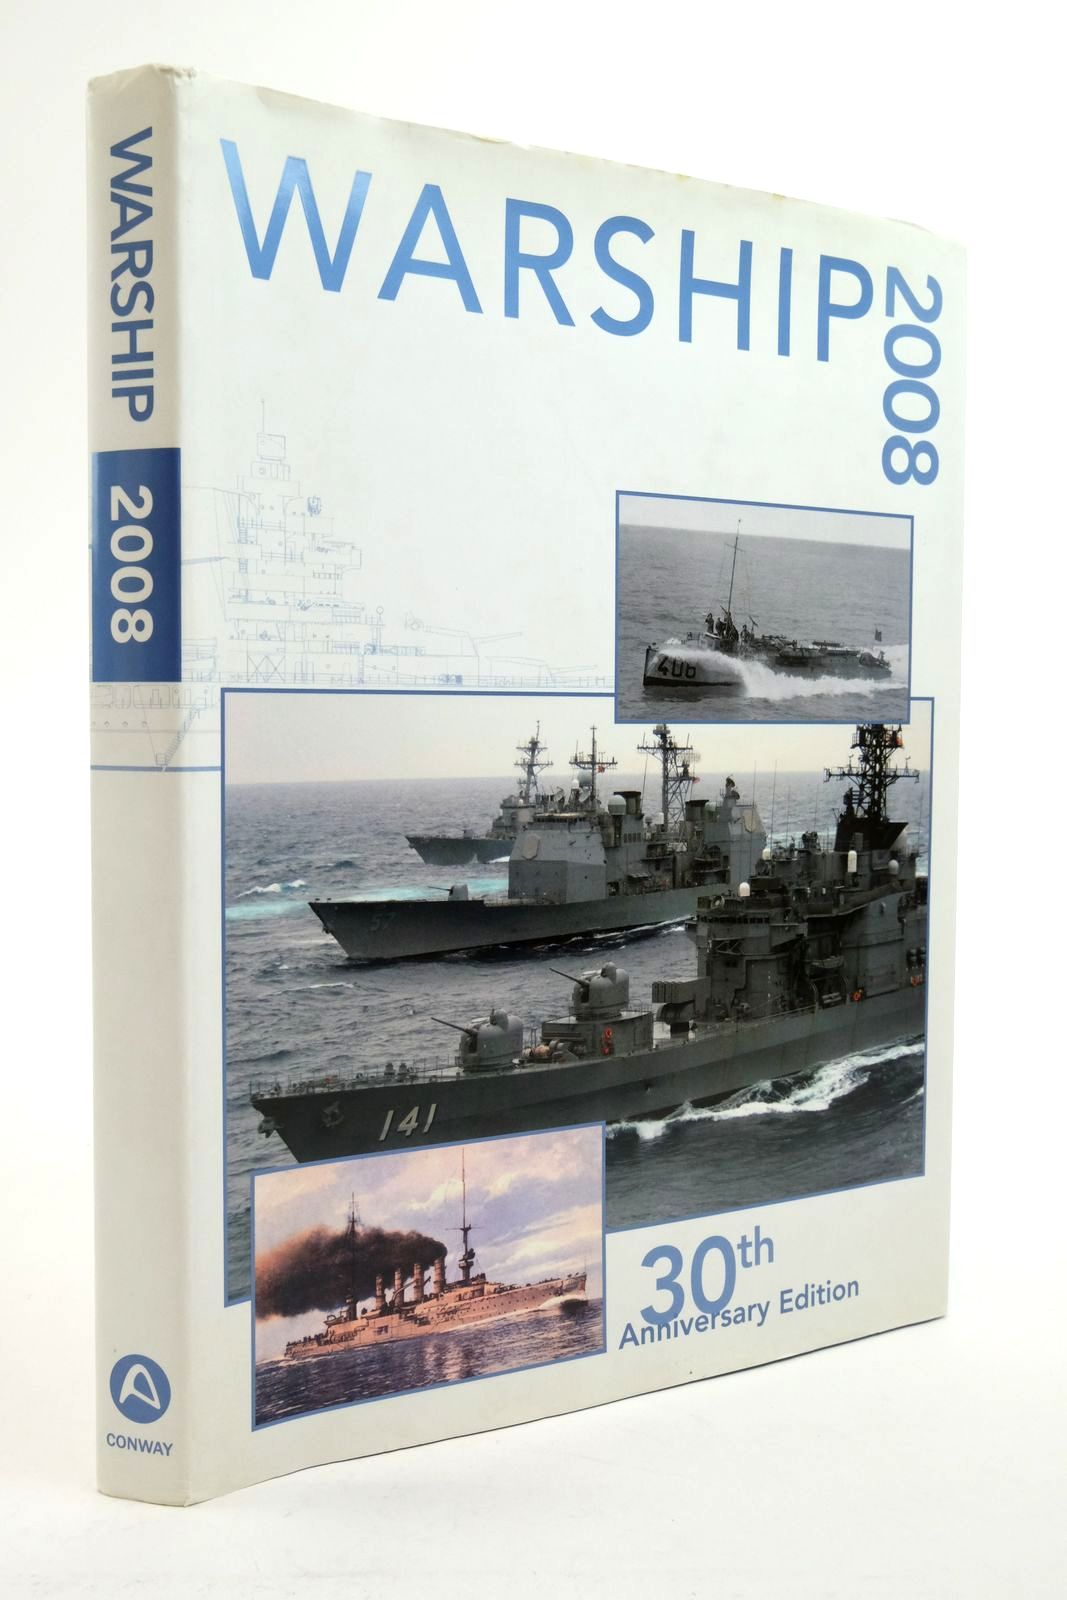 Photo of WARSHIP 2008 written by Preston, Anthony Jordan, John Dent, Stephen published by Conway (STOCK CODE: 2138859)  for sale by Stella & Rose's Books